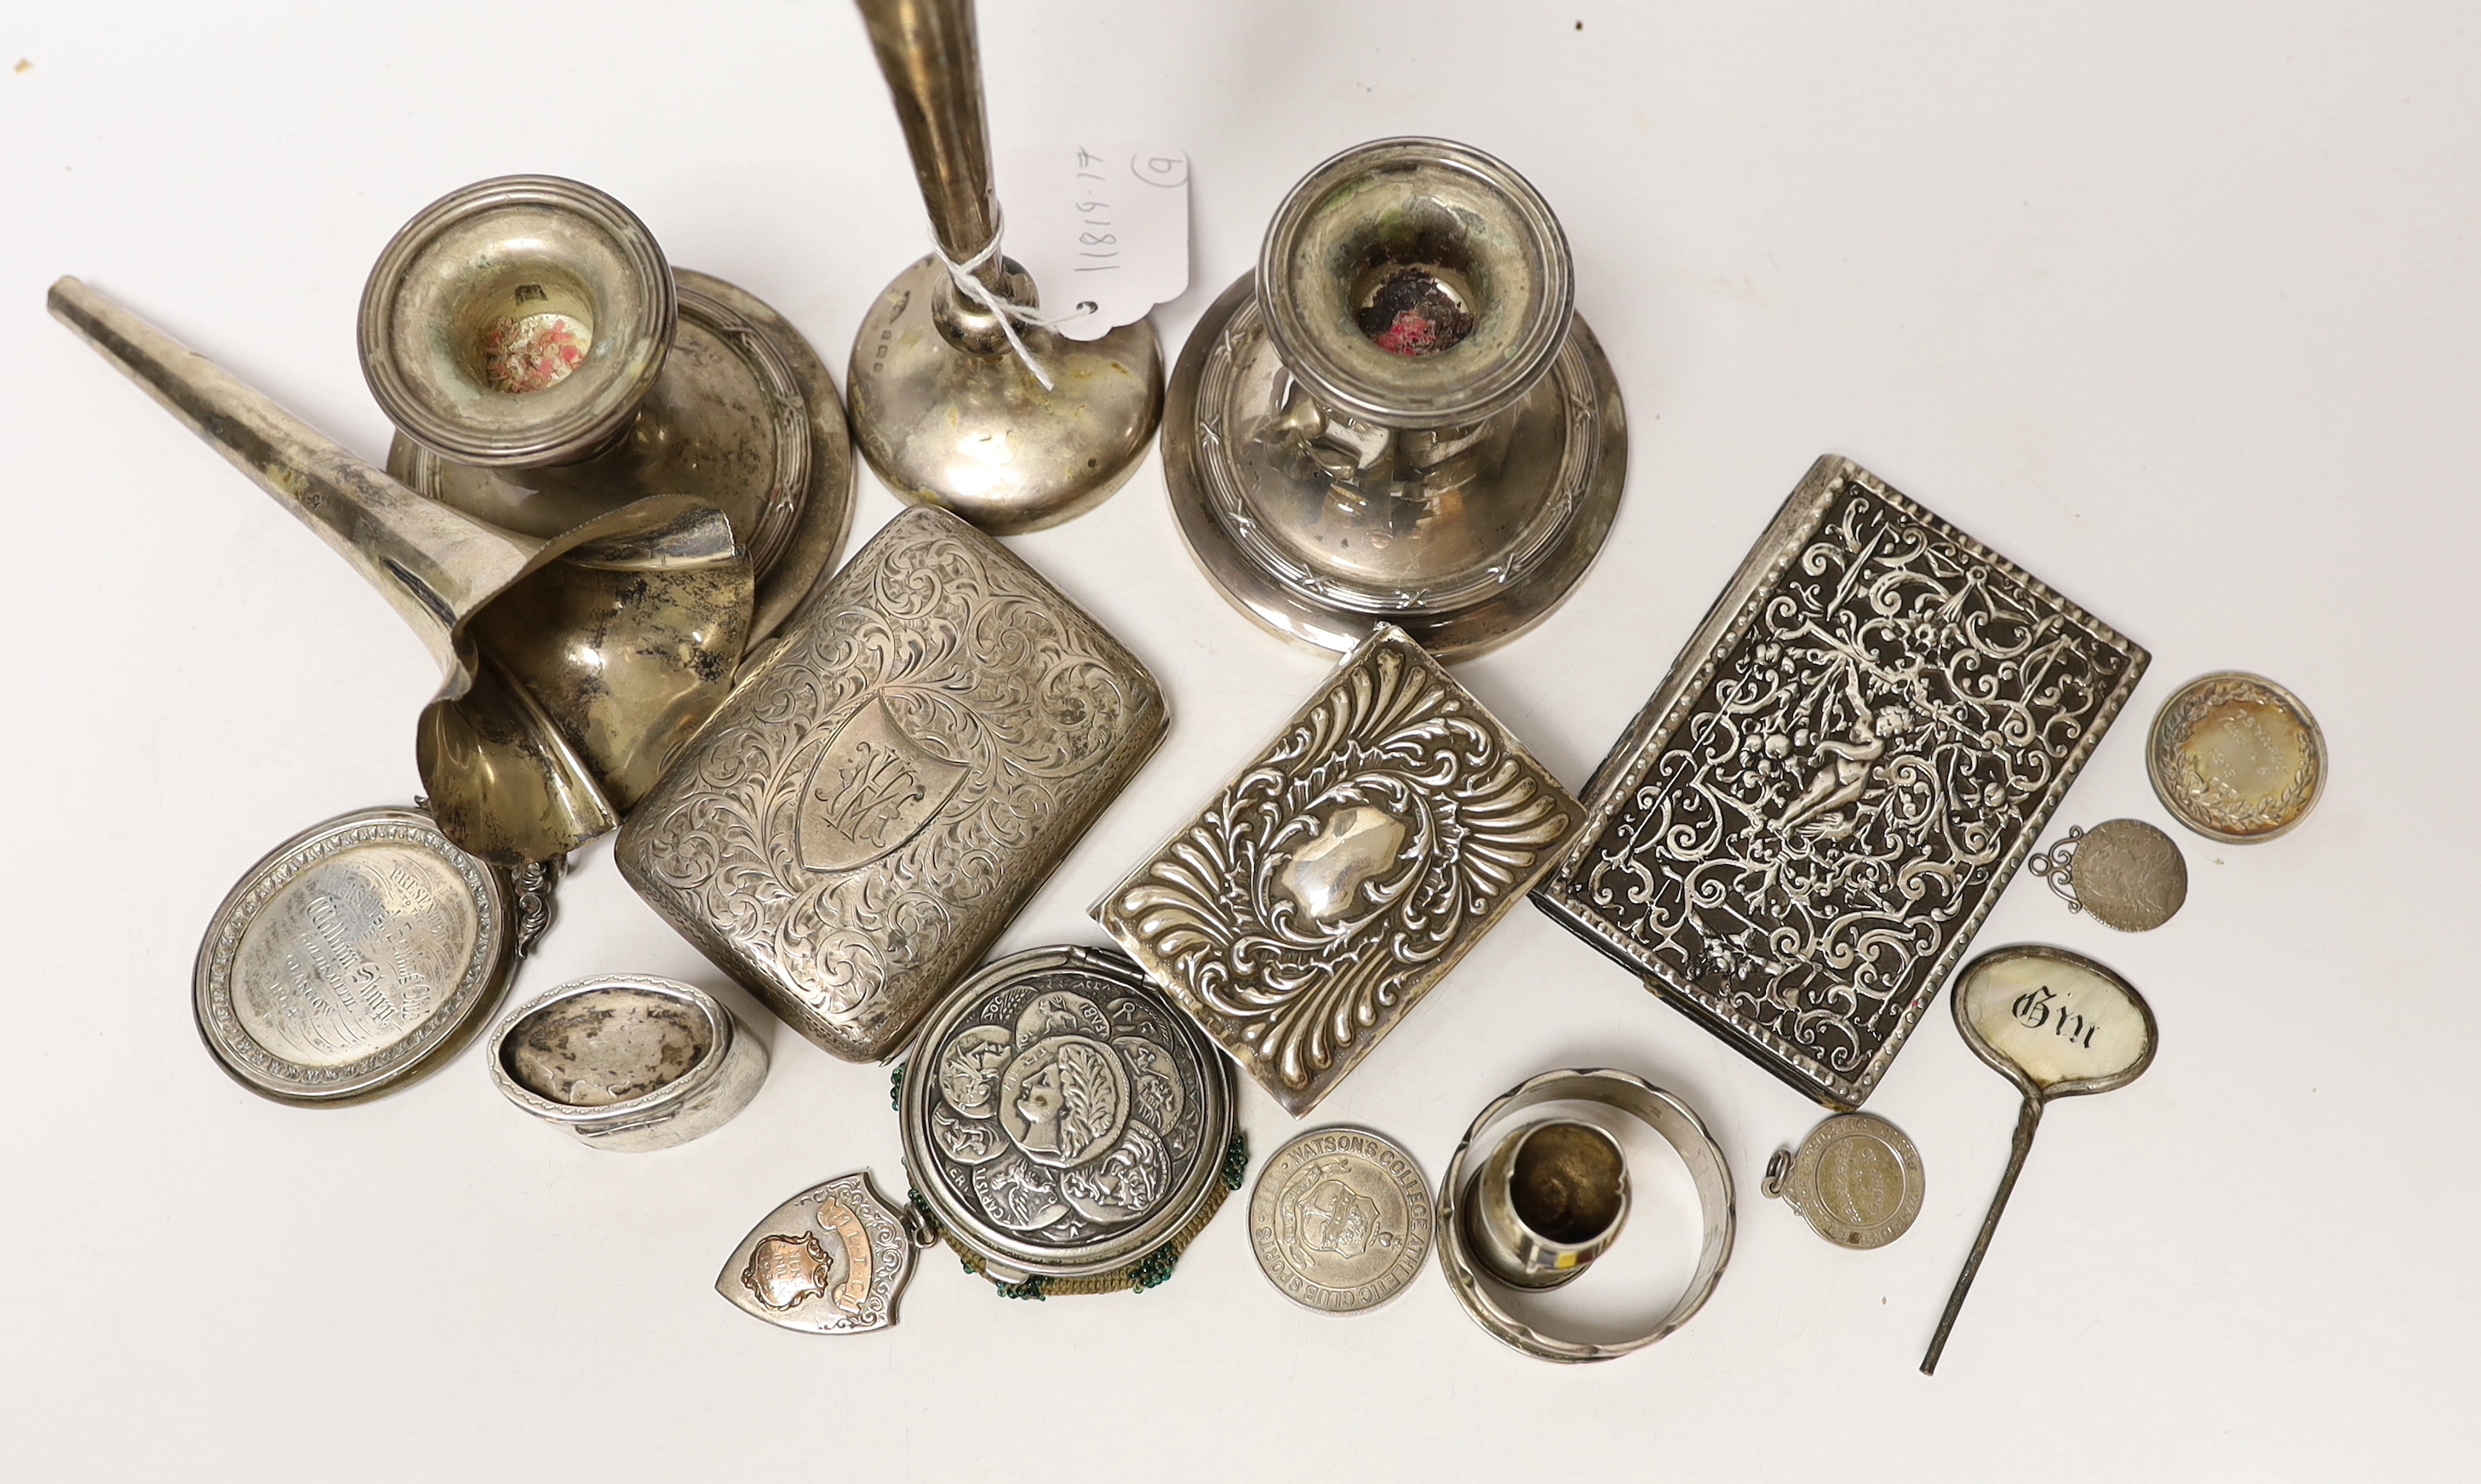 A modern pair of silver mounted dwarf candlesticks and other sundry silver items including cigarette case, medals etc.